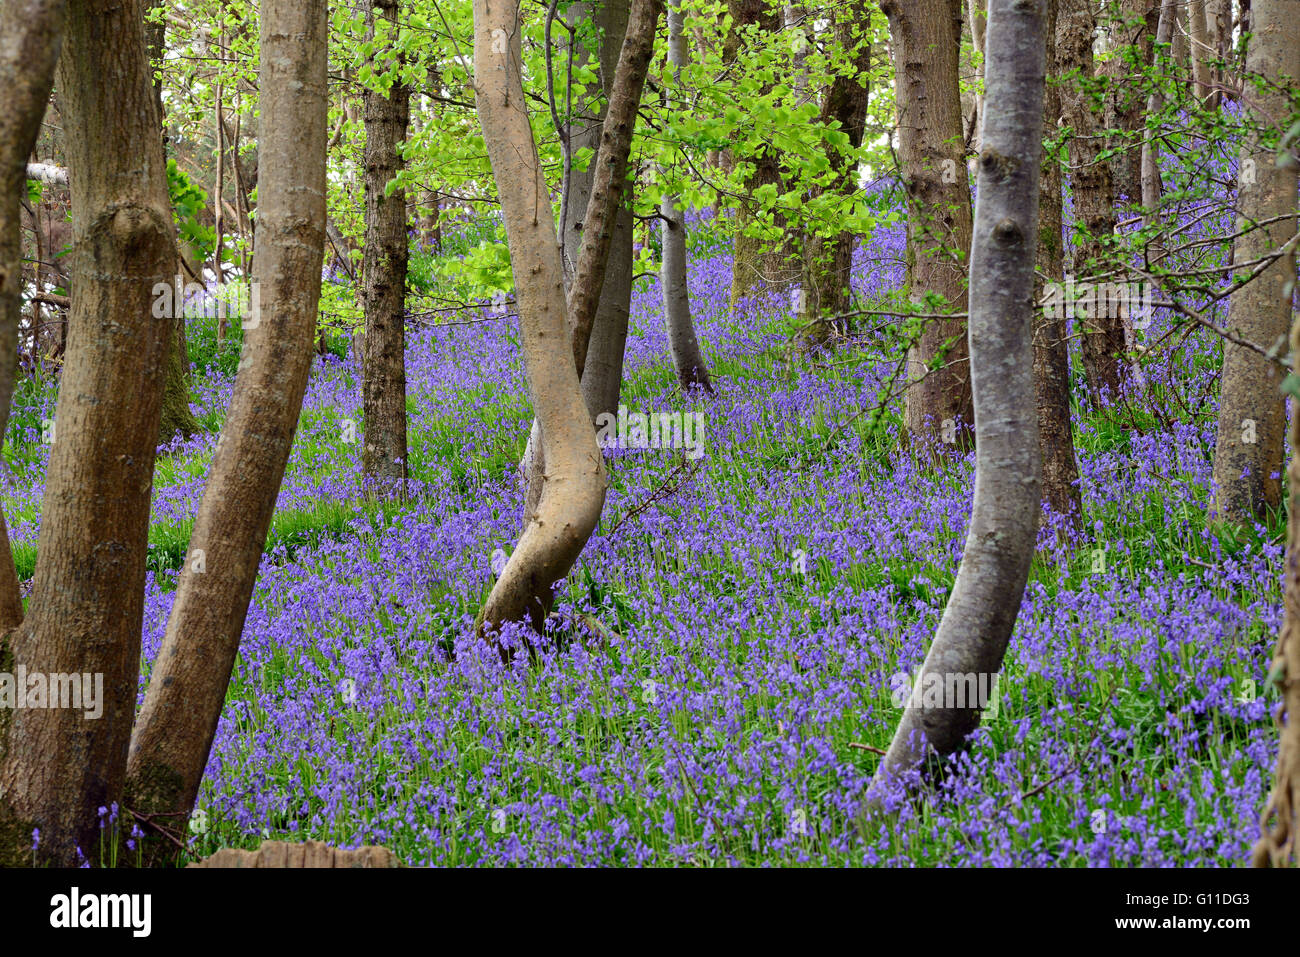 Aberystwyth, Wales, UK. 07th May, 2016. UK Weather - Bluebell flowers carpet a wood near Aberystwyth, Wales UK as warm weather moves across the UK. Credit:  John Gilbey/Alamy Live News Stock Photo